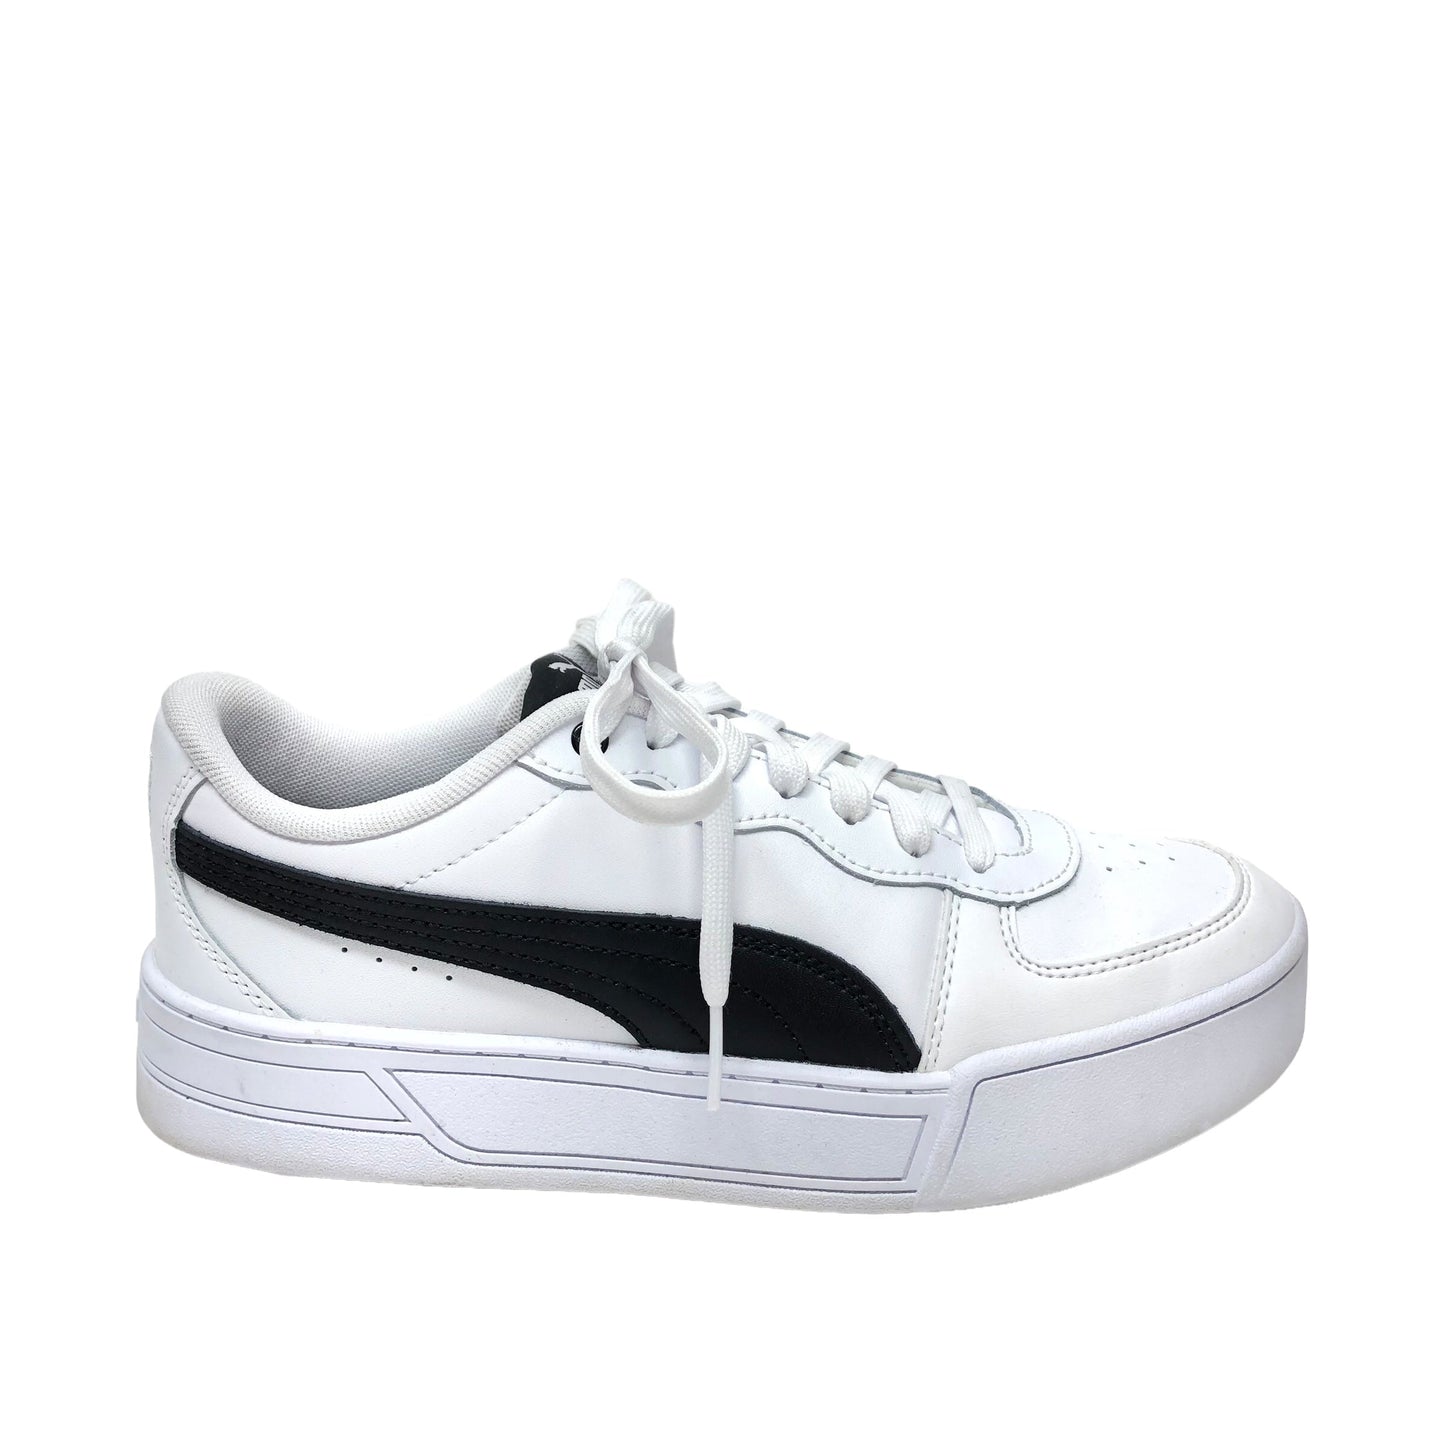 Black & White Shoes Sneakers Puma, Size 8